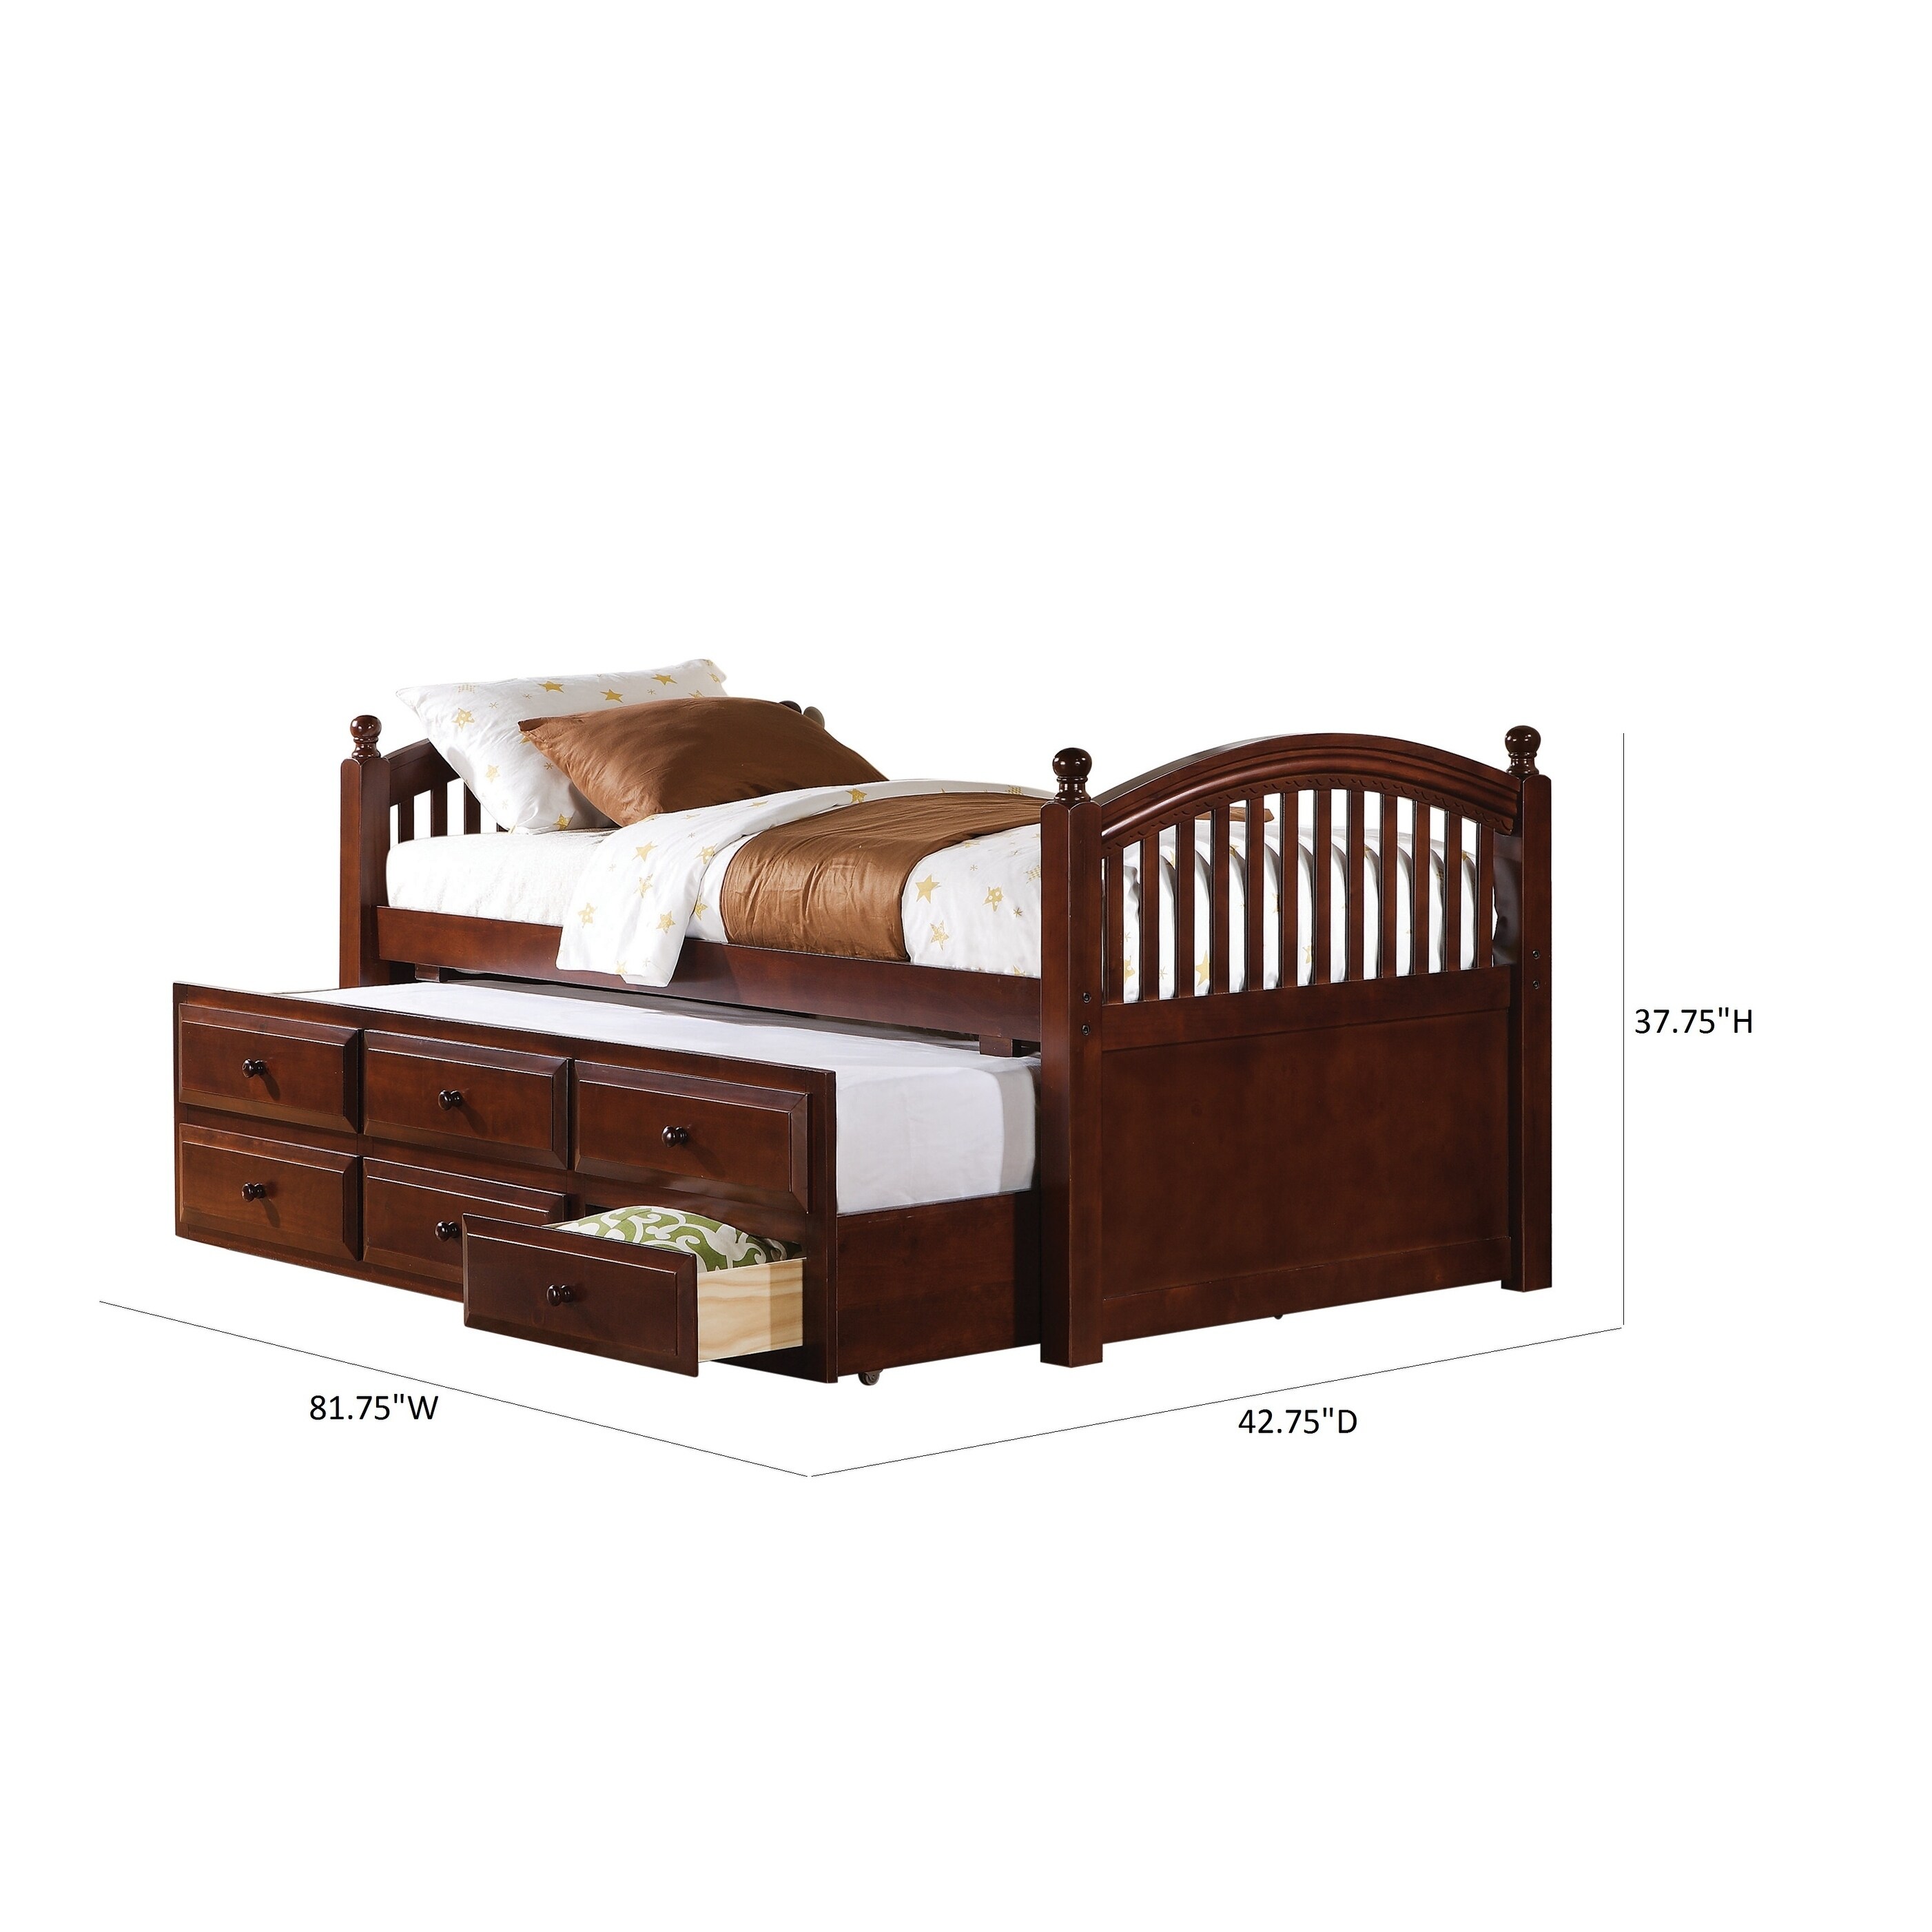 Coaster Furniture Norwood Chestnut Twin Captain's Bed with Trundle and Drawers